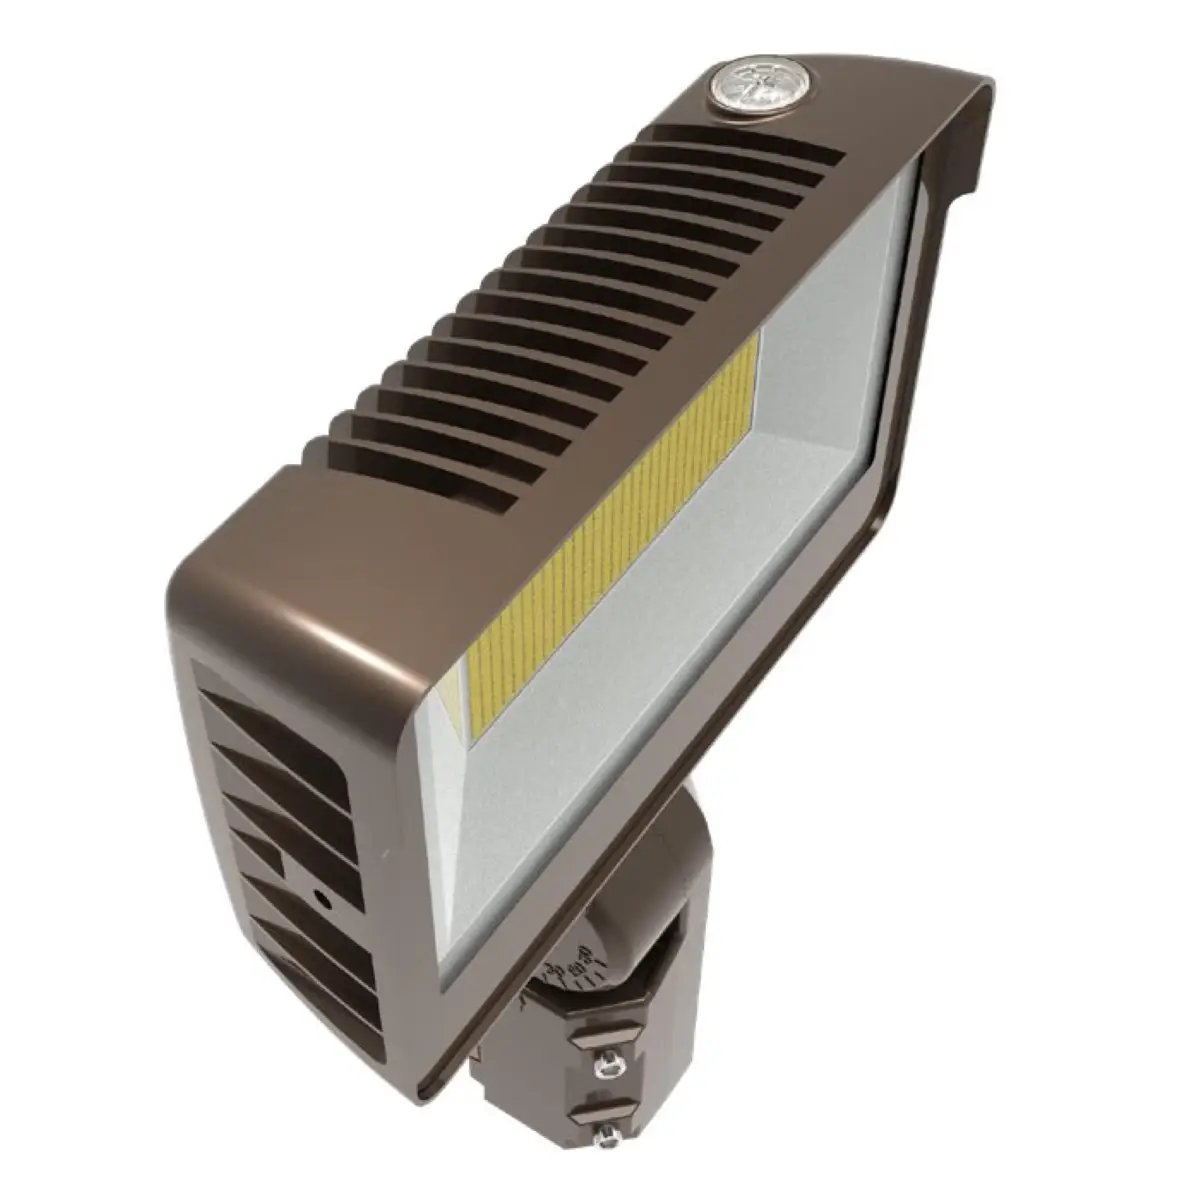 Exterior Flood Light with adjustable white light, universal mounting options, and built-in photocell. 10725 lumens, 75W, LED, 3000K-5000K color temperature, UL Listed, IP65 Rated, DLC Premium Listed. Slip fitter and trunnion mount. Die-cast aluminum, tempered glass. 10.55&quot;W x 3.38&quot;D x 7.05&quot;H. 5-year warranty.